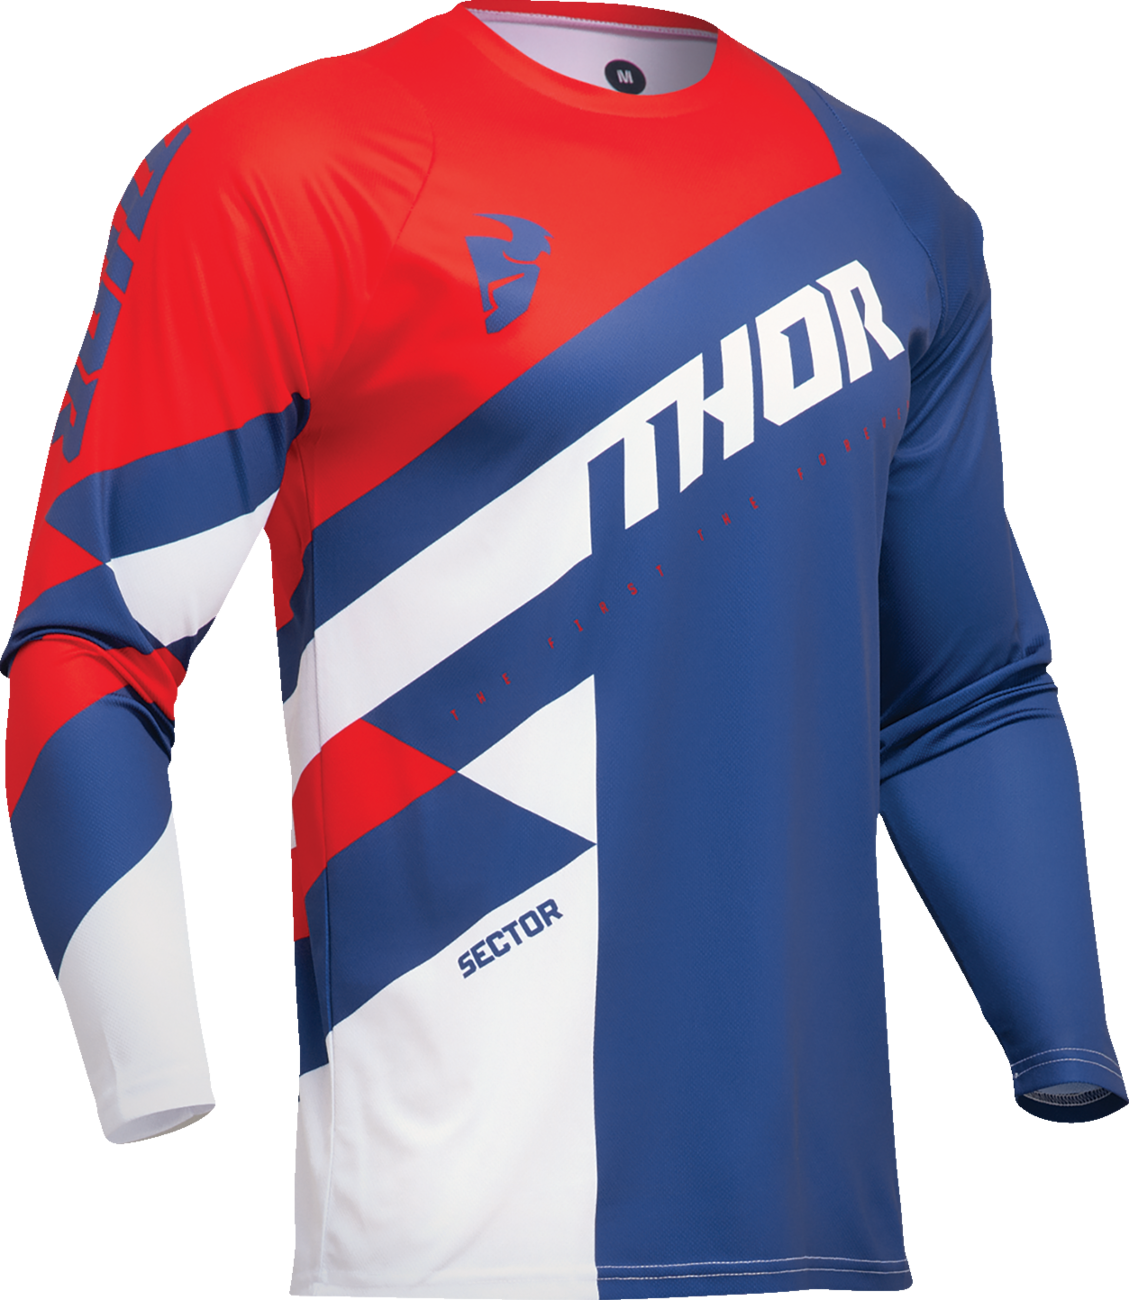 THOR Youth Sector Checker Jersey - Navy/Red - XS 2912-2425